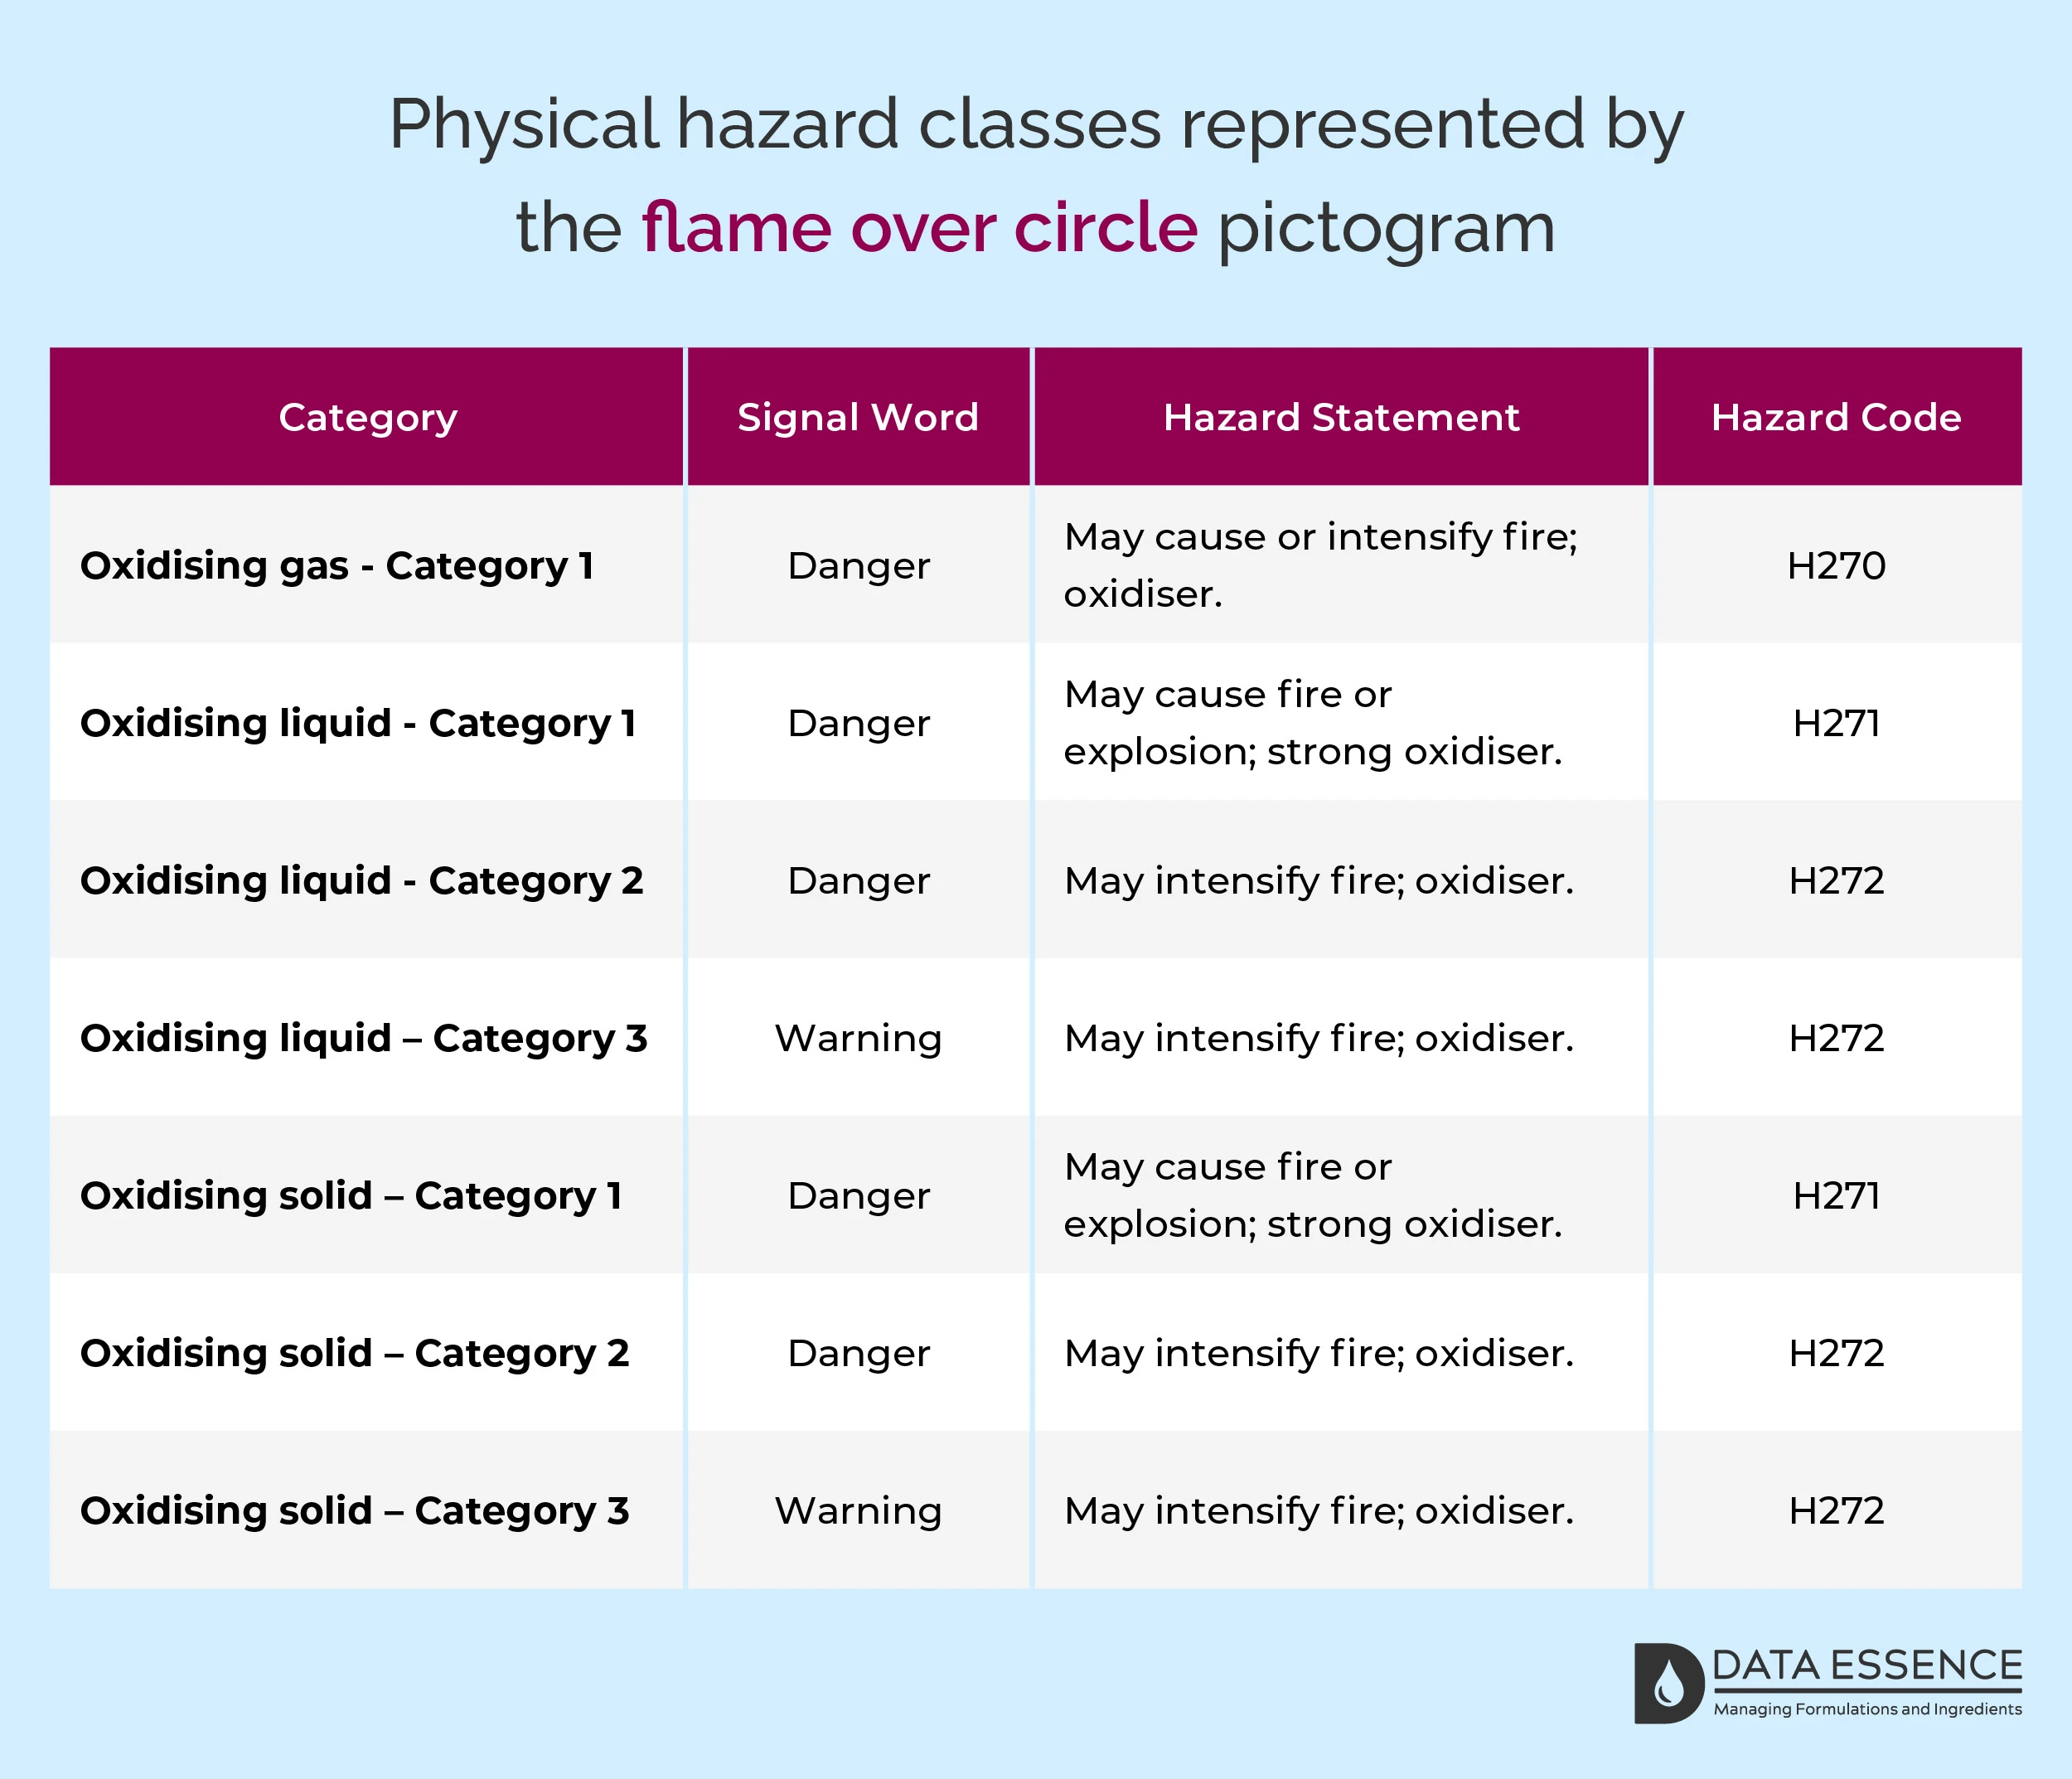 Physical hazard classes represented by the flame over circle pictogram